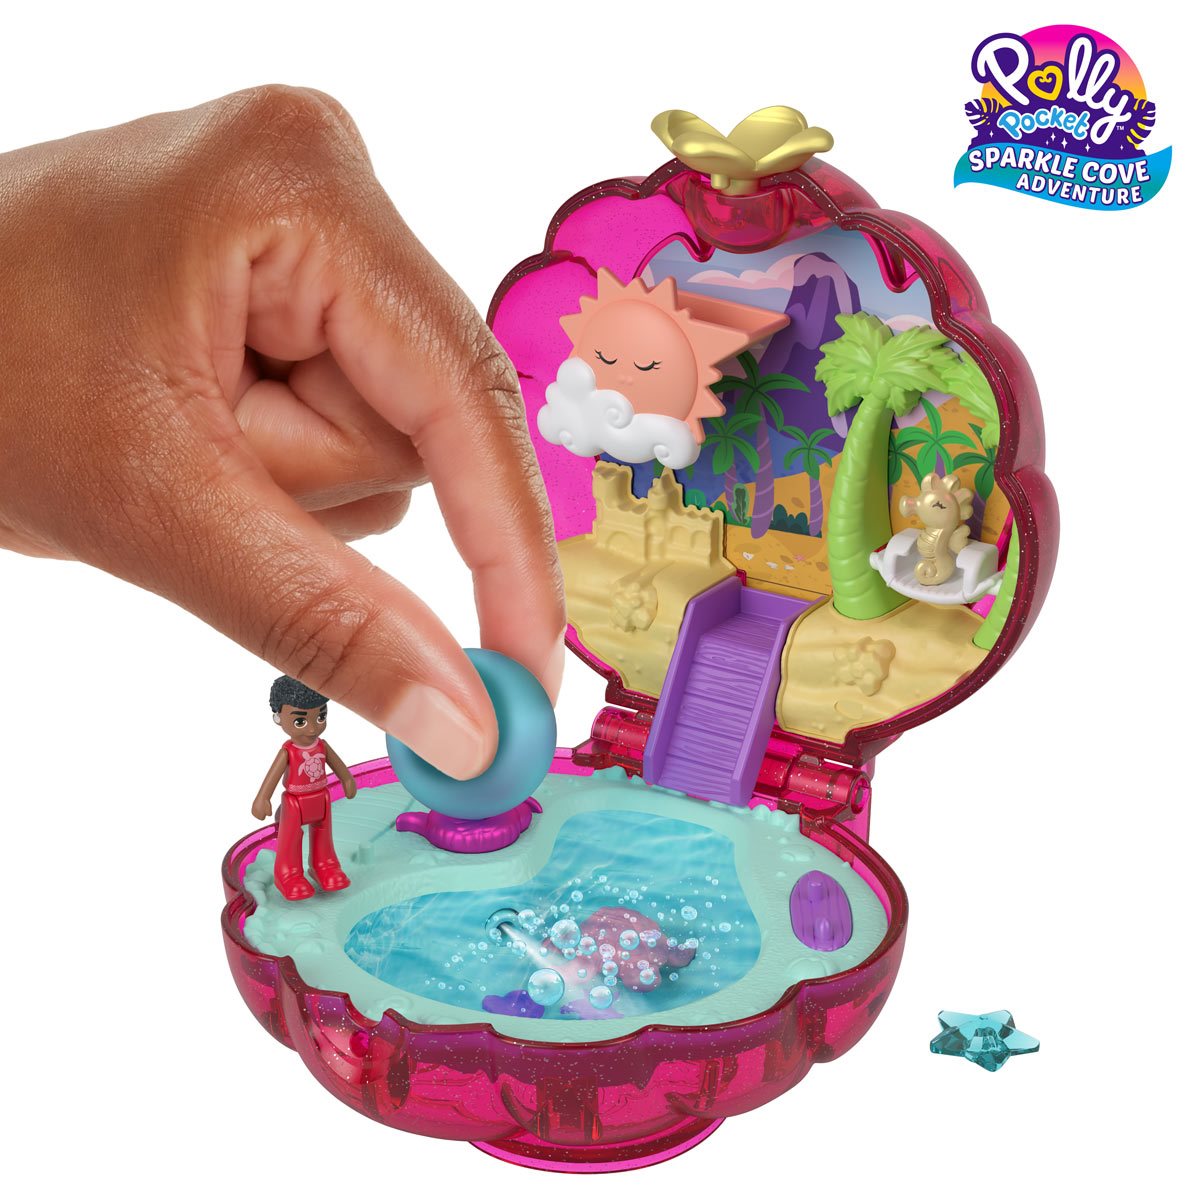 Buy Polly Pocket Llama Camp Adventure Compact, Playsets and figures